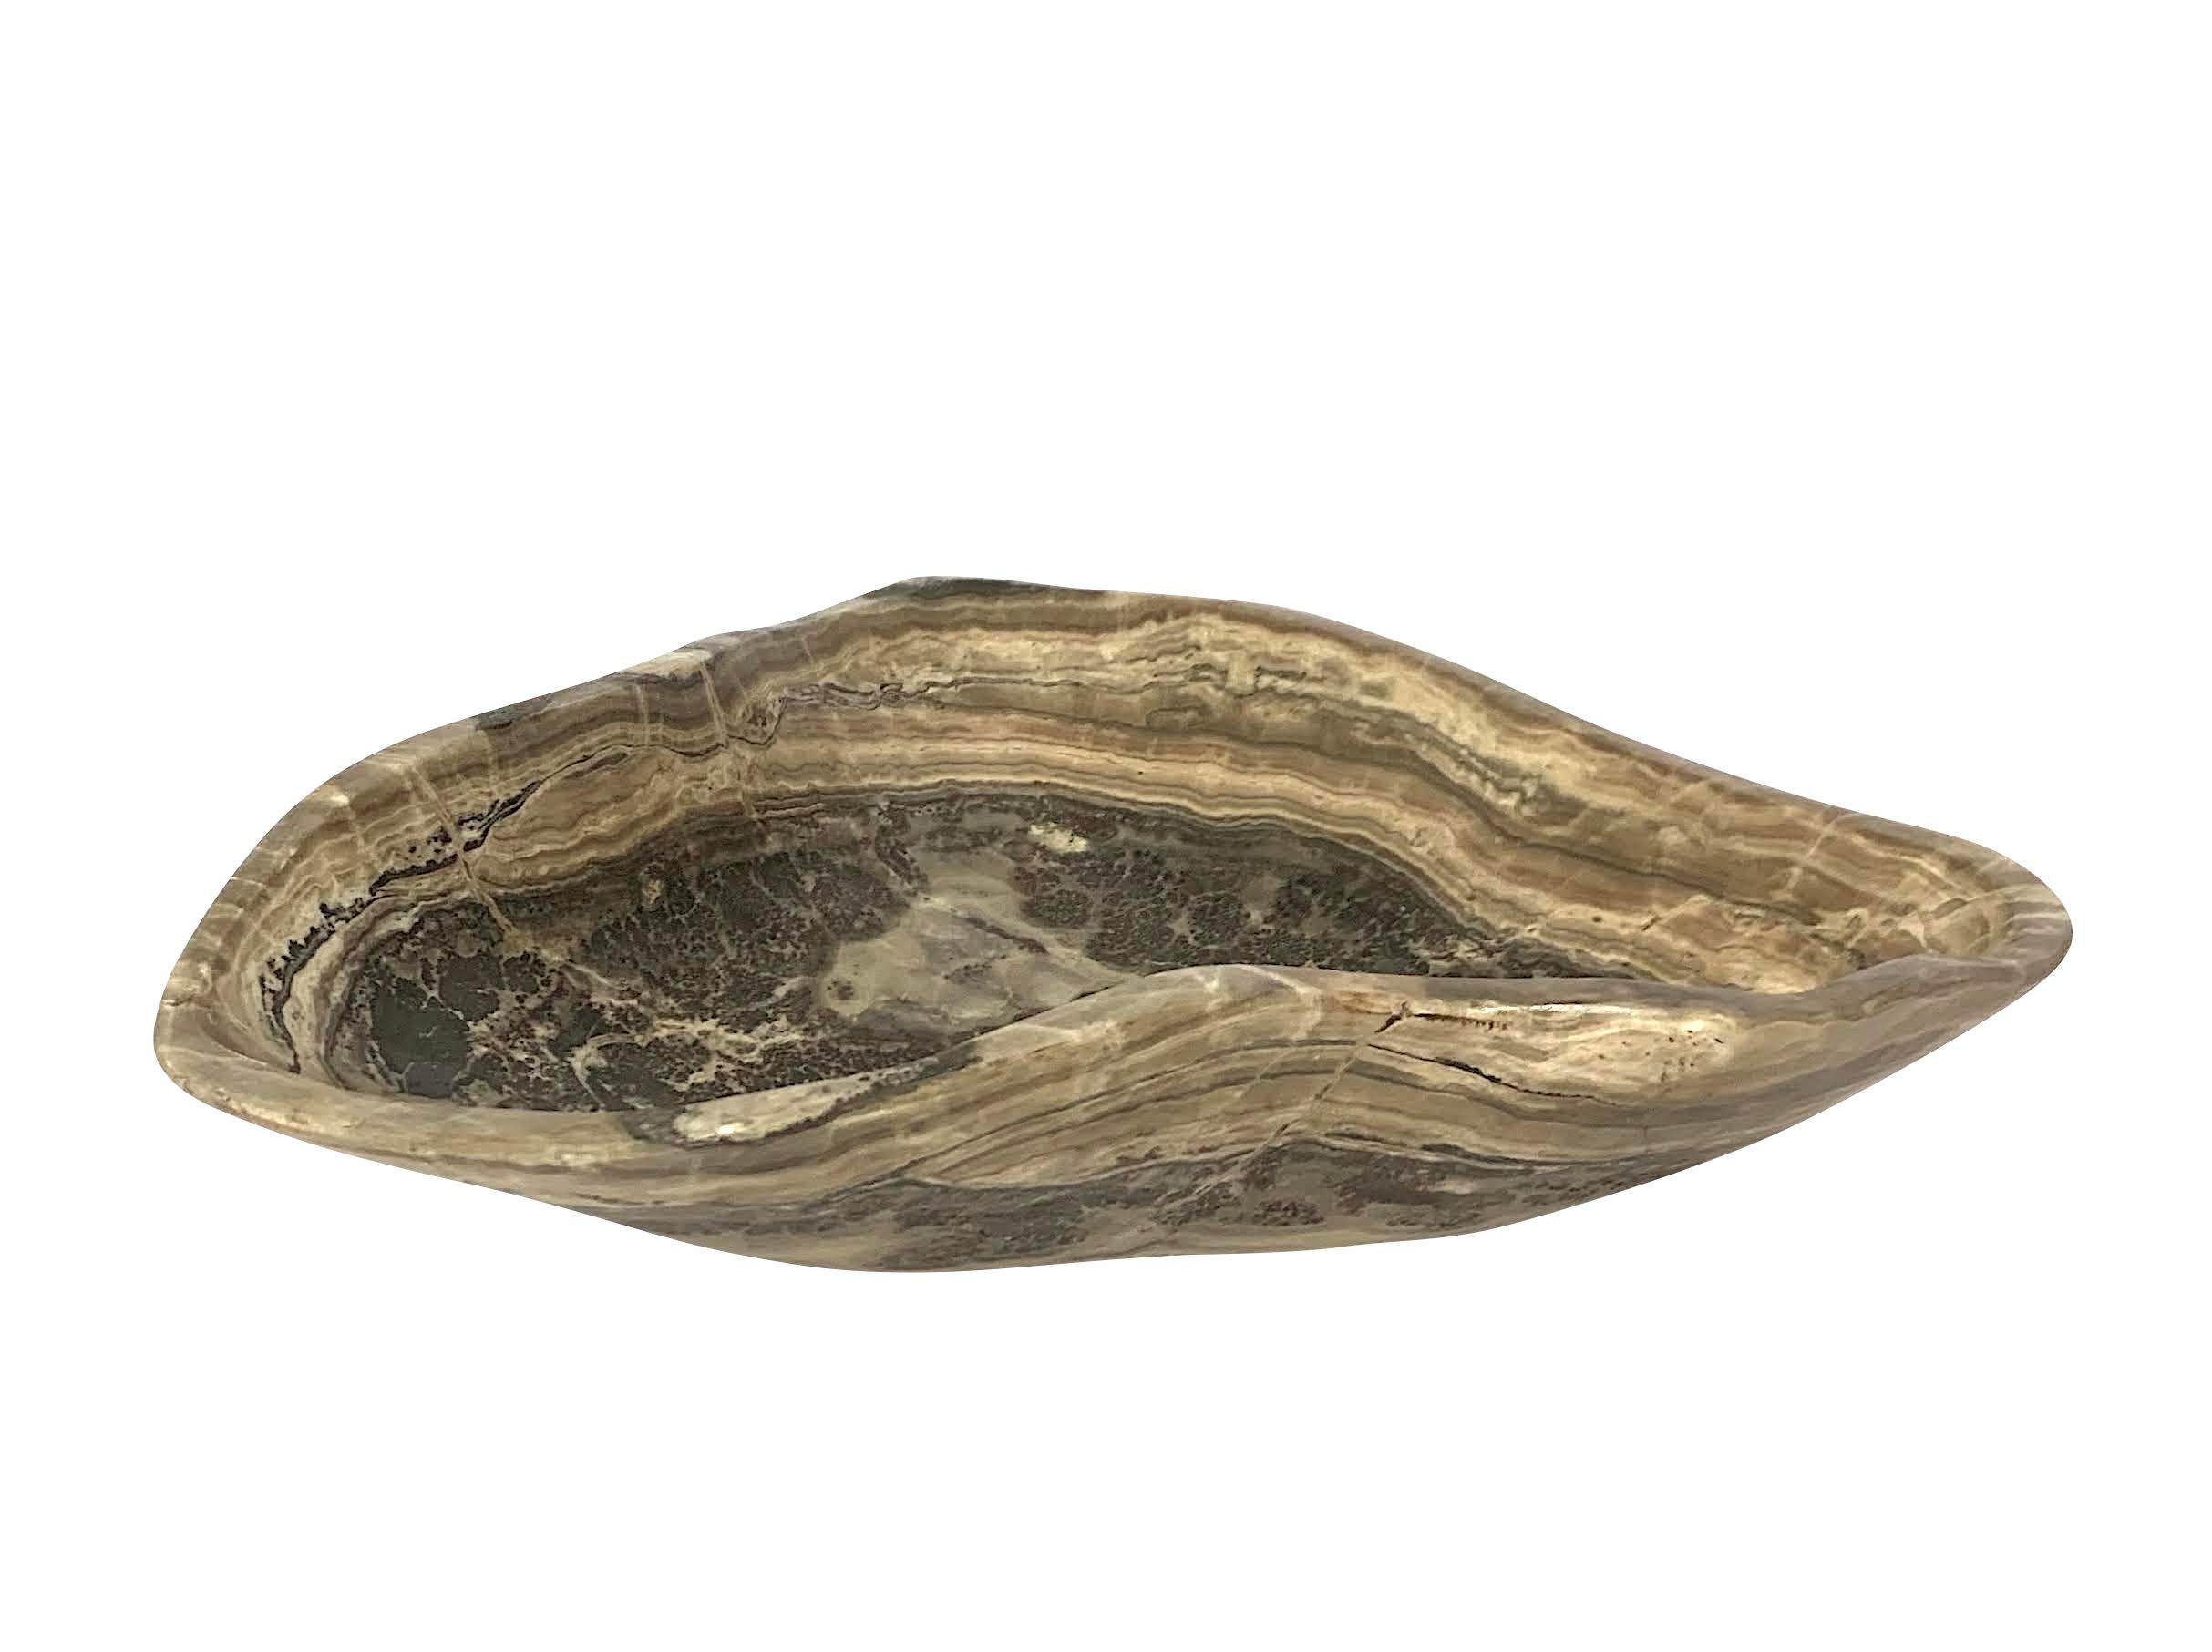 Contemporary Moroccan free form shaped onyx bowl.
Grey and taupe in color.
From a large collection of different shapes, sizes and colors.